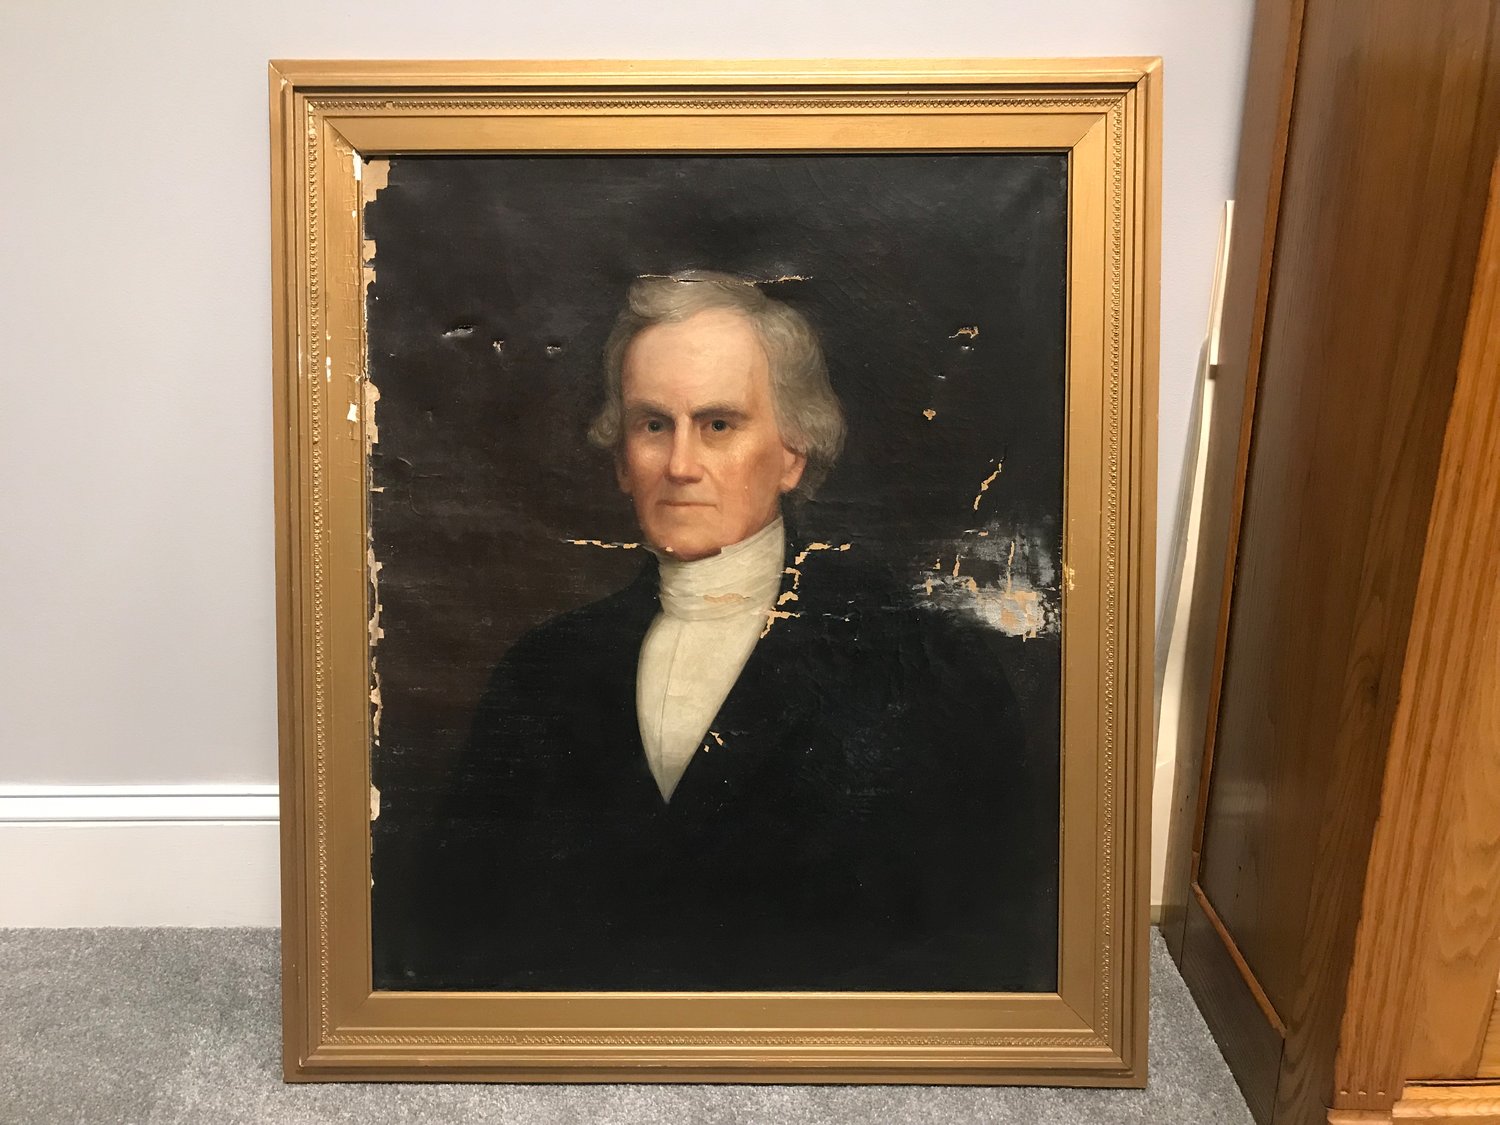 This painting of the first superintendent of Bristol schools was damaged while sitting in a basement for many years. It may take about $5,500 to restore it.